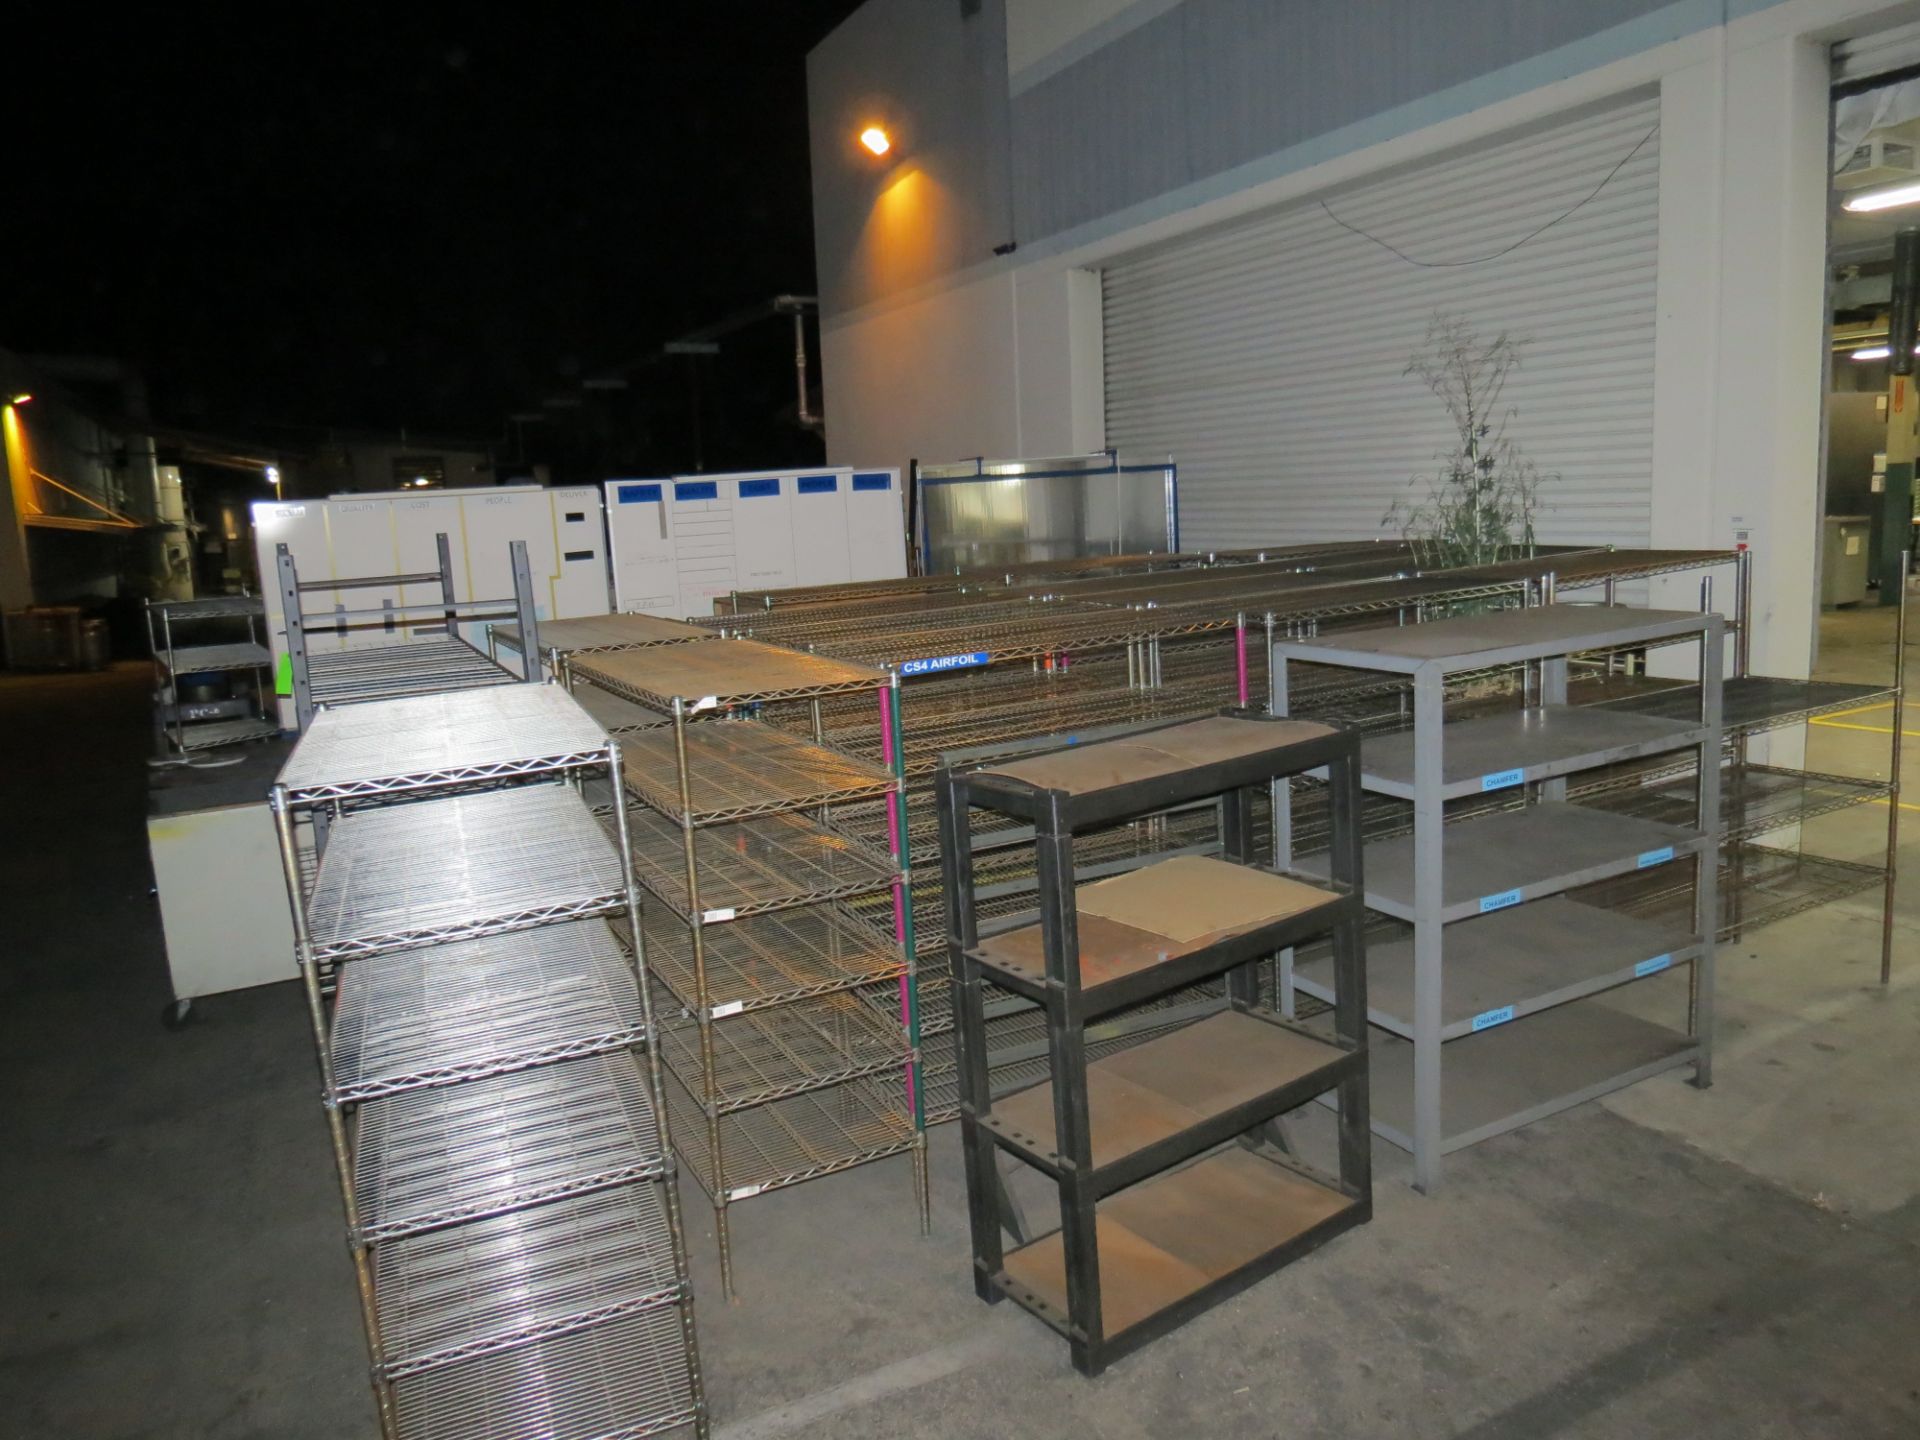 LOT OF ASSORTED CHROME WIRE RACKS, METAL SHELVES, CABINETS AND WHITE BOARDS, NO PRECISION SURFACE - Image 4 of 4